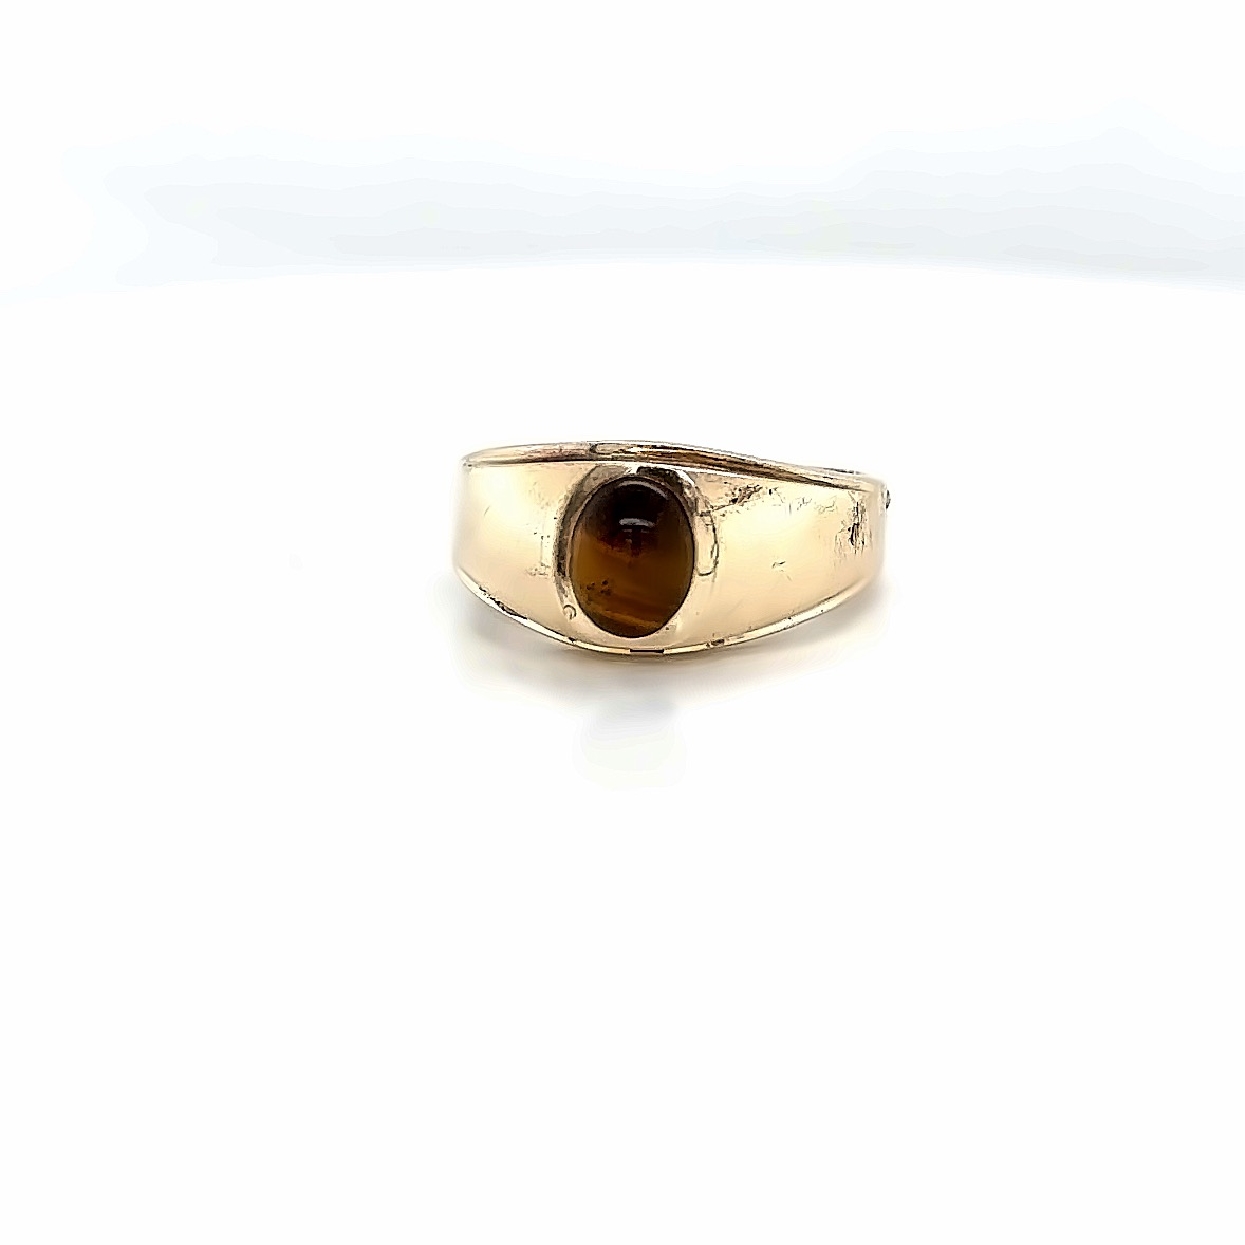 10K Yellow Gold Signet Style Ring with Tiger s Eye Cabochon Center Stone

Size 8.75